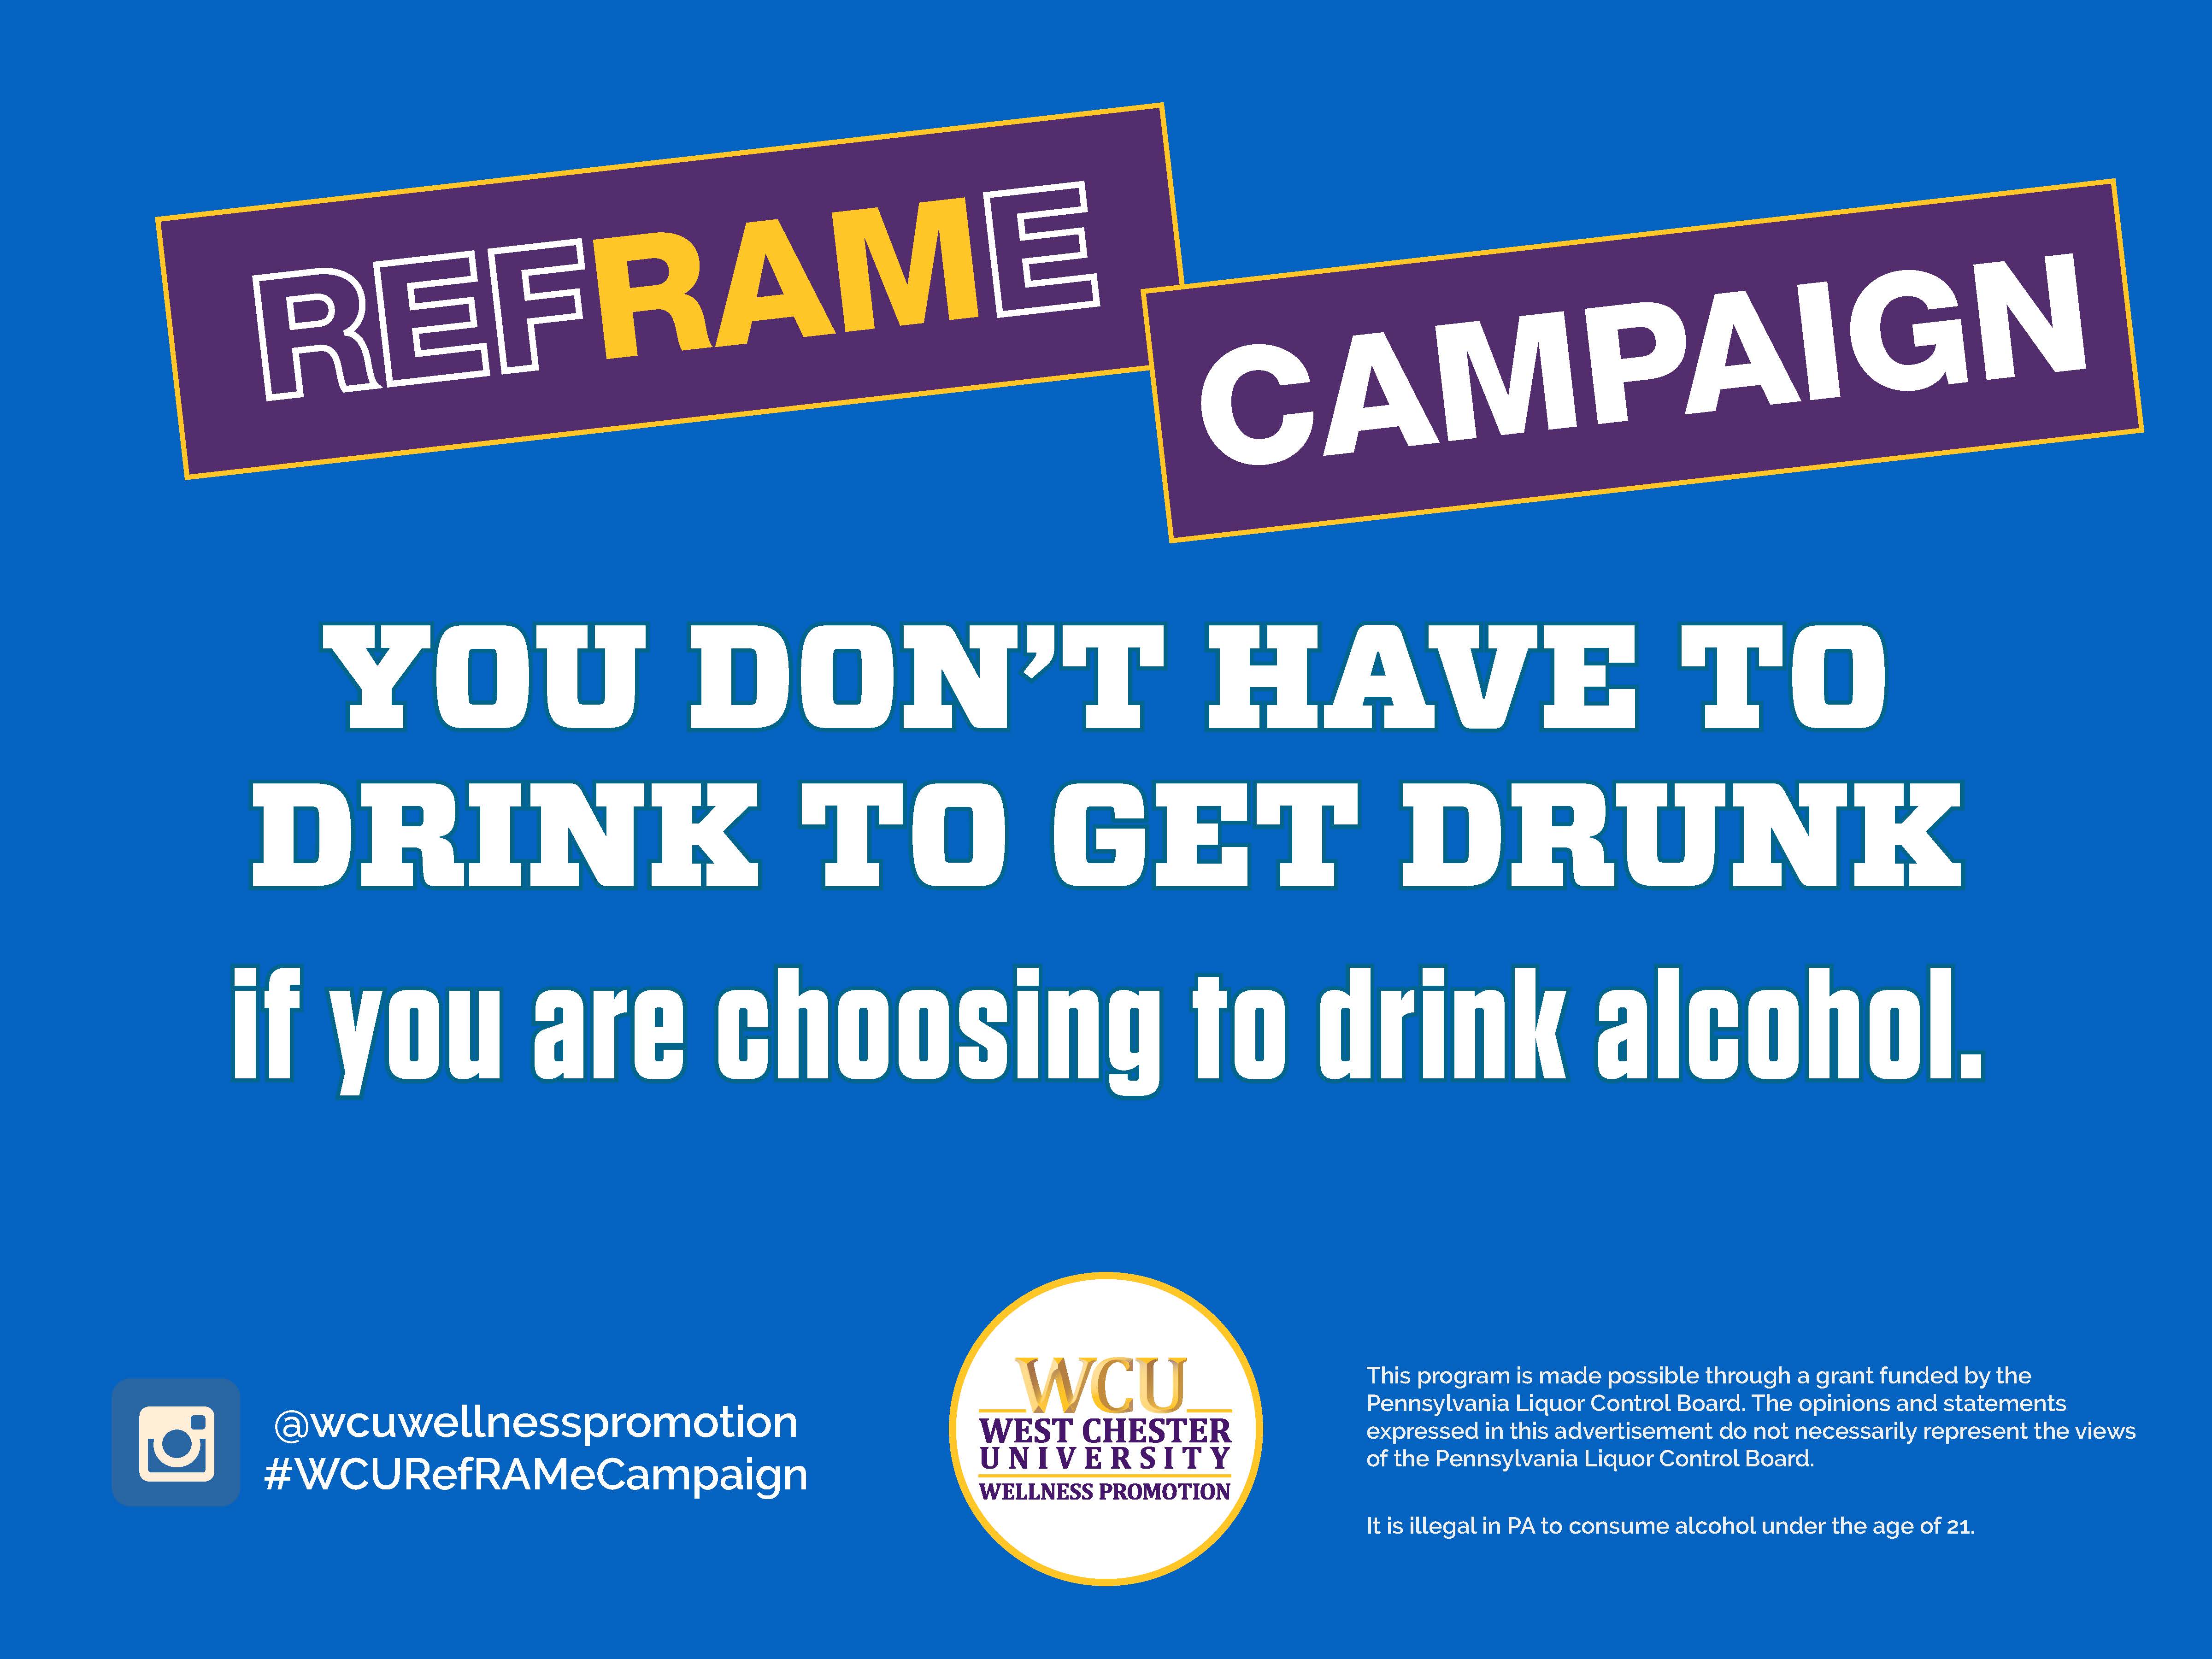 Reframe Campaign. You don't have to drink to get drunk if you are choosing to drink alcohol.